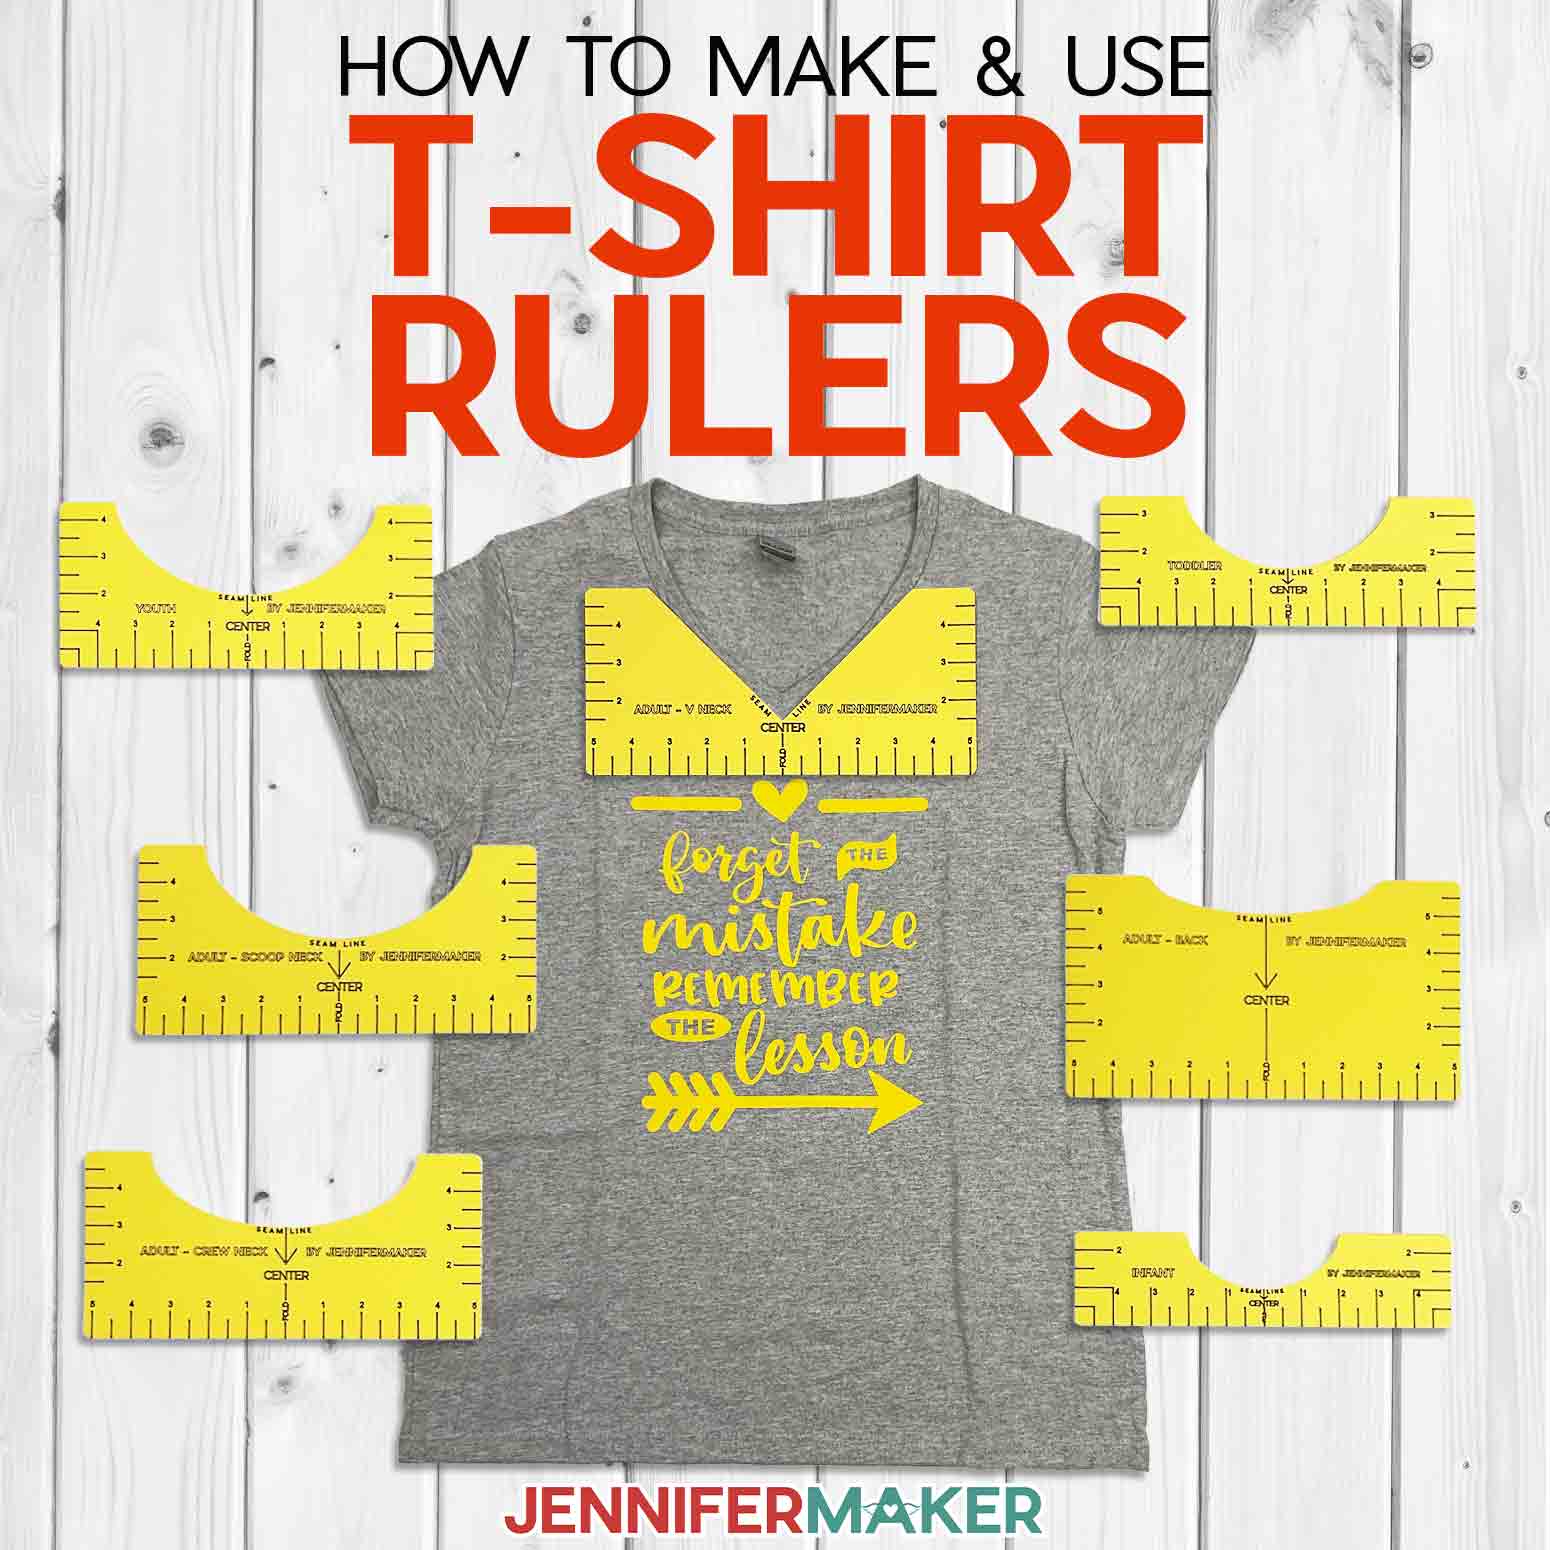 T-Shirt Ruler Guide for Perfect Placement of Decals on Shirts